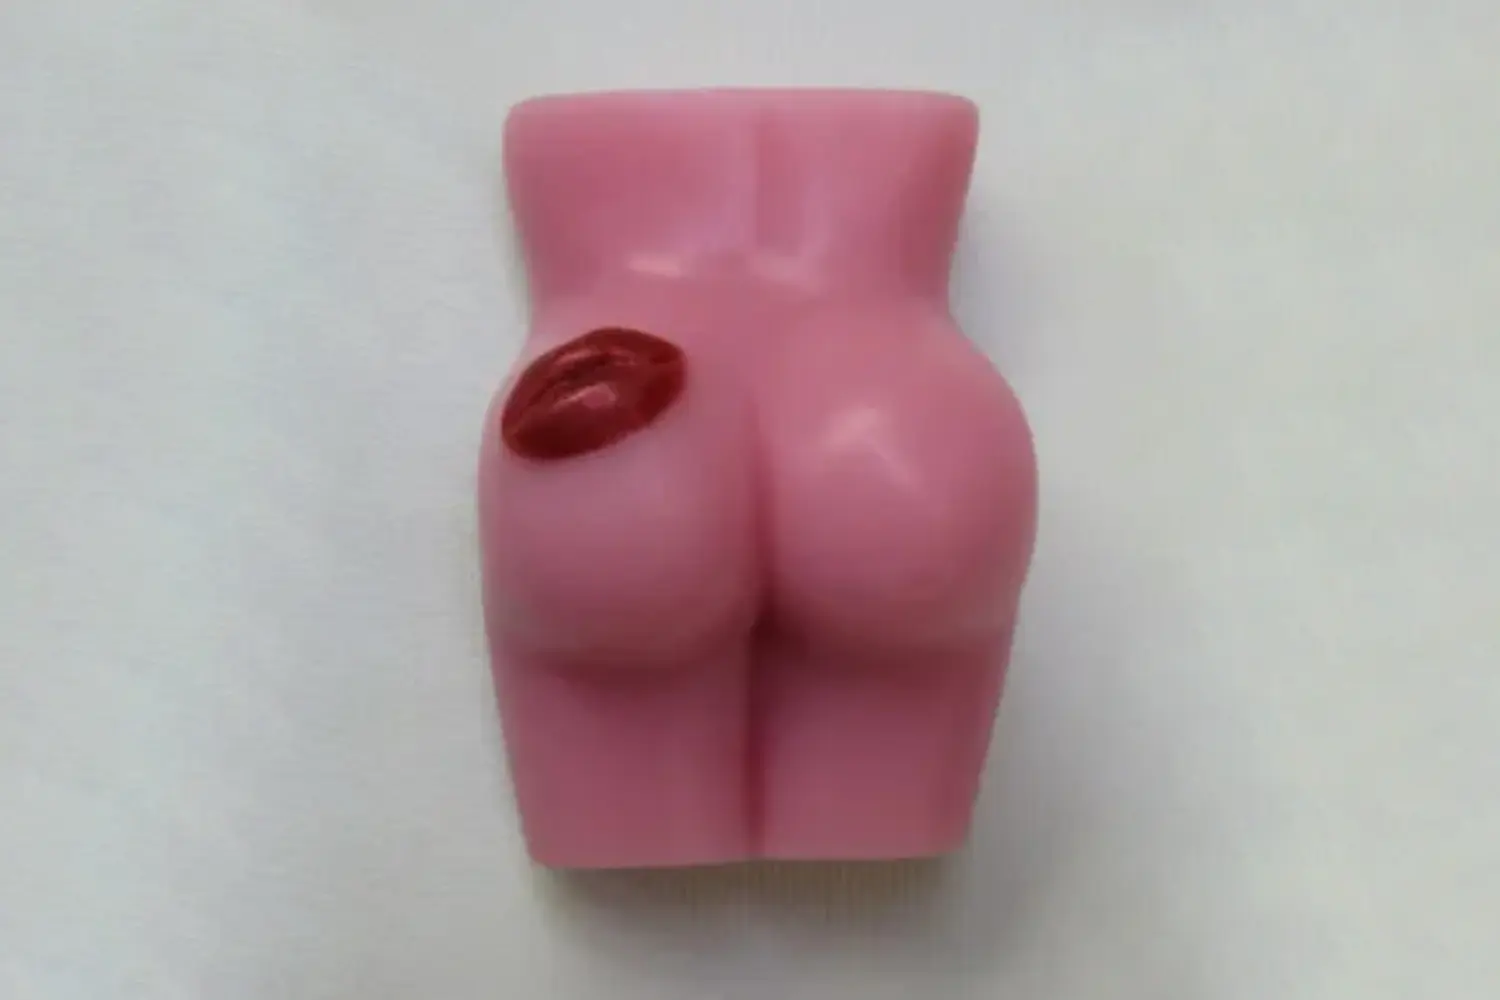 A pink soap shaped like a woman 's butt and lip.